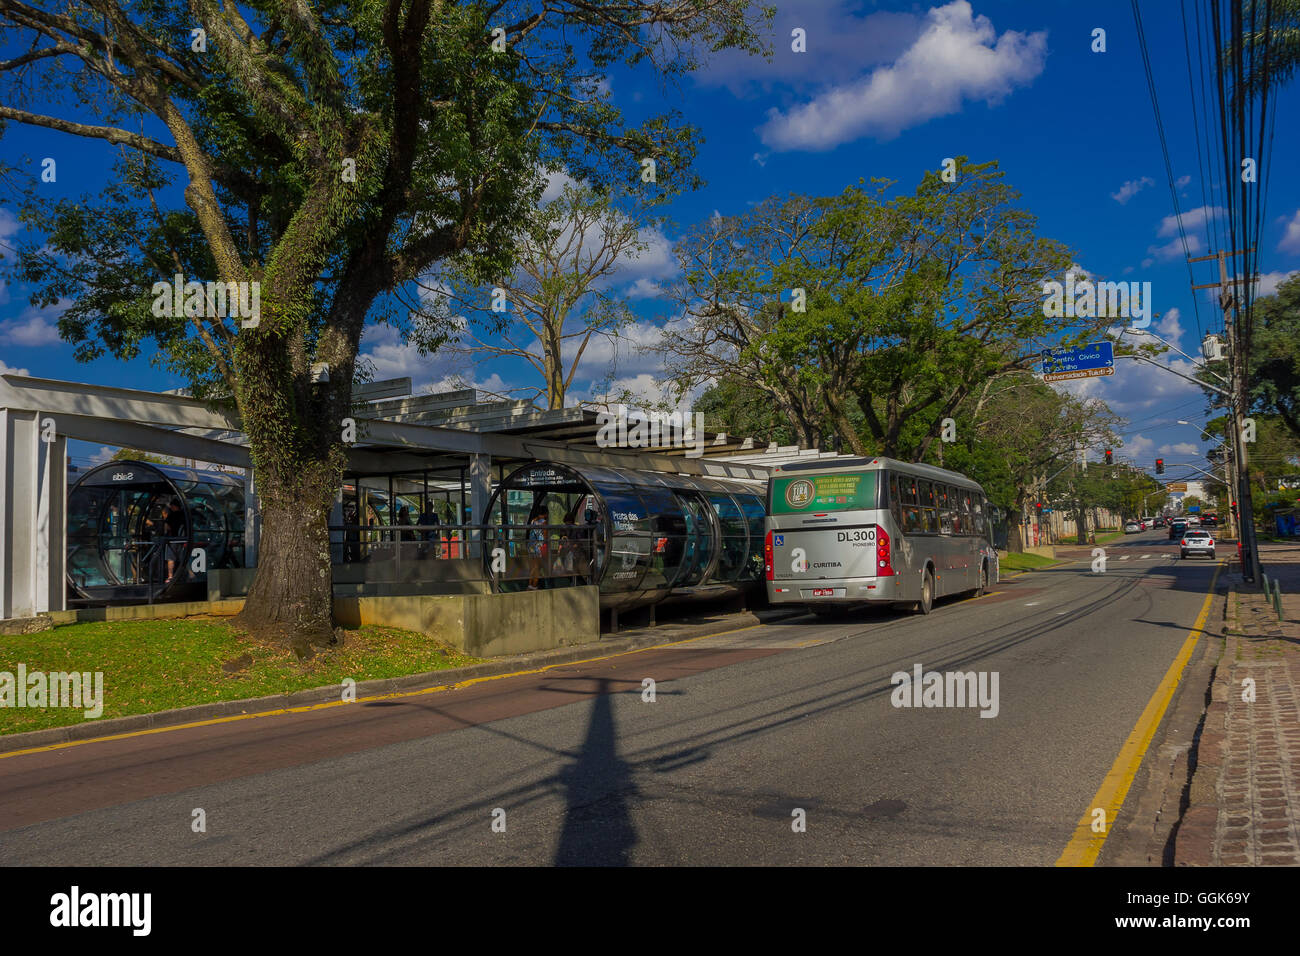 CURITIBA ,BRAZIL - MAY 12, 2016: public gray bus picking up passengers from a station, white car waiting for the green light at the corner Stock Photo